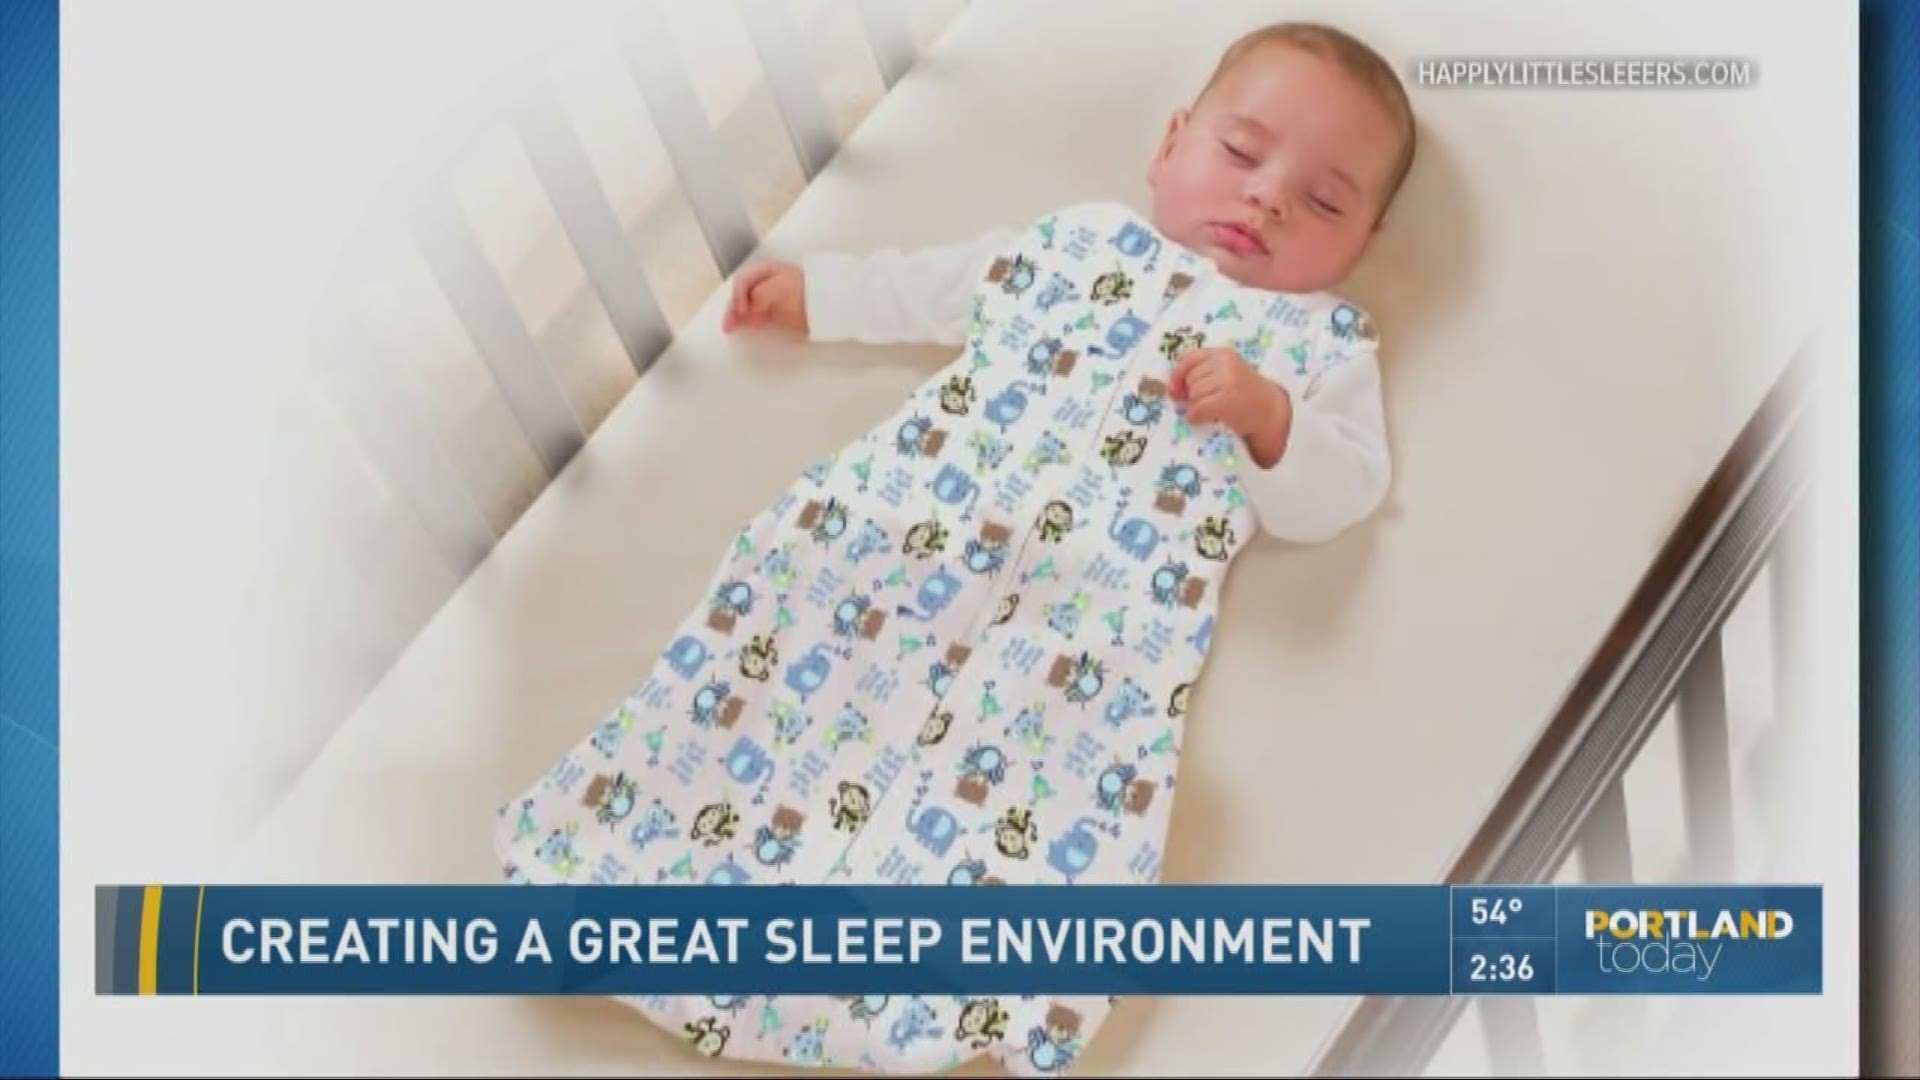 Natalie Wiles, author and baby sleep trainer